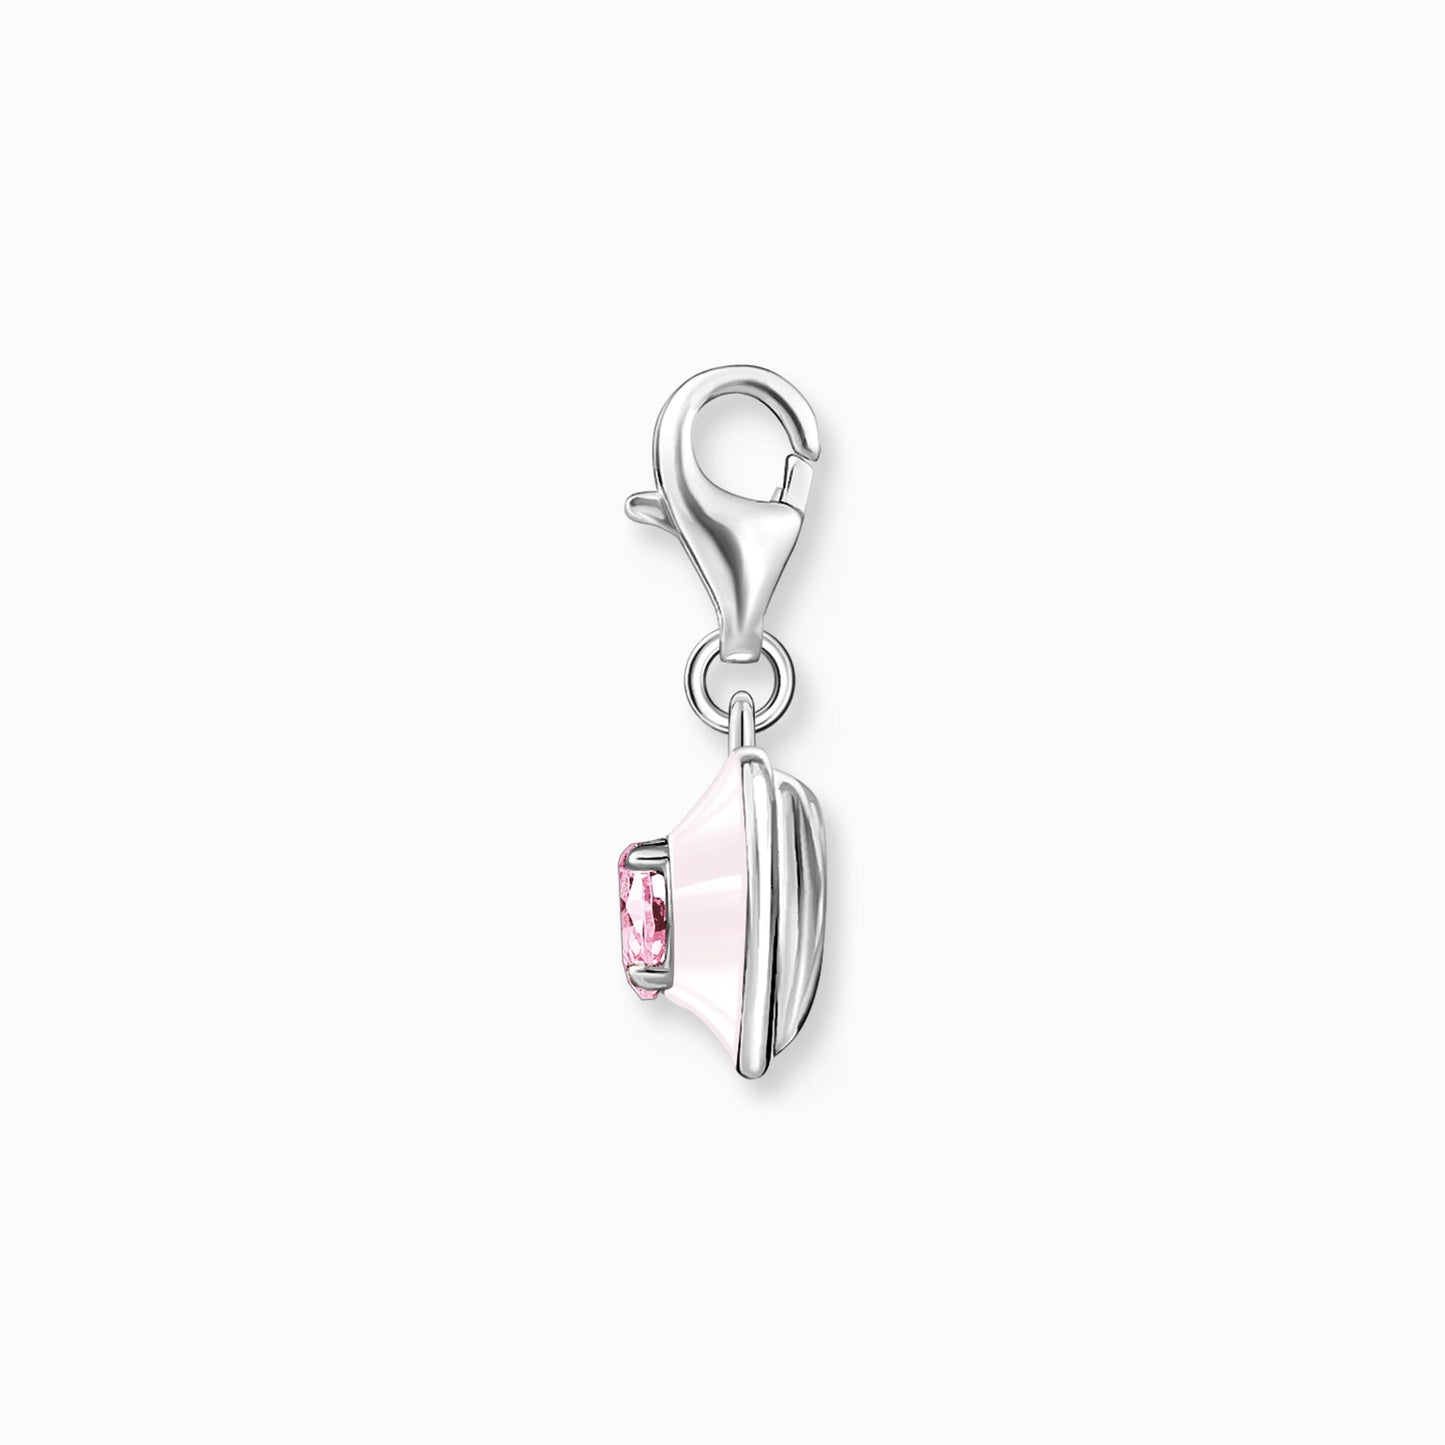 Thomas Sabo Charm Pendant Heart With Pink Stones Silver 1915-041-9